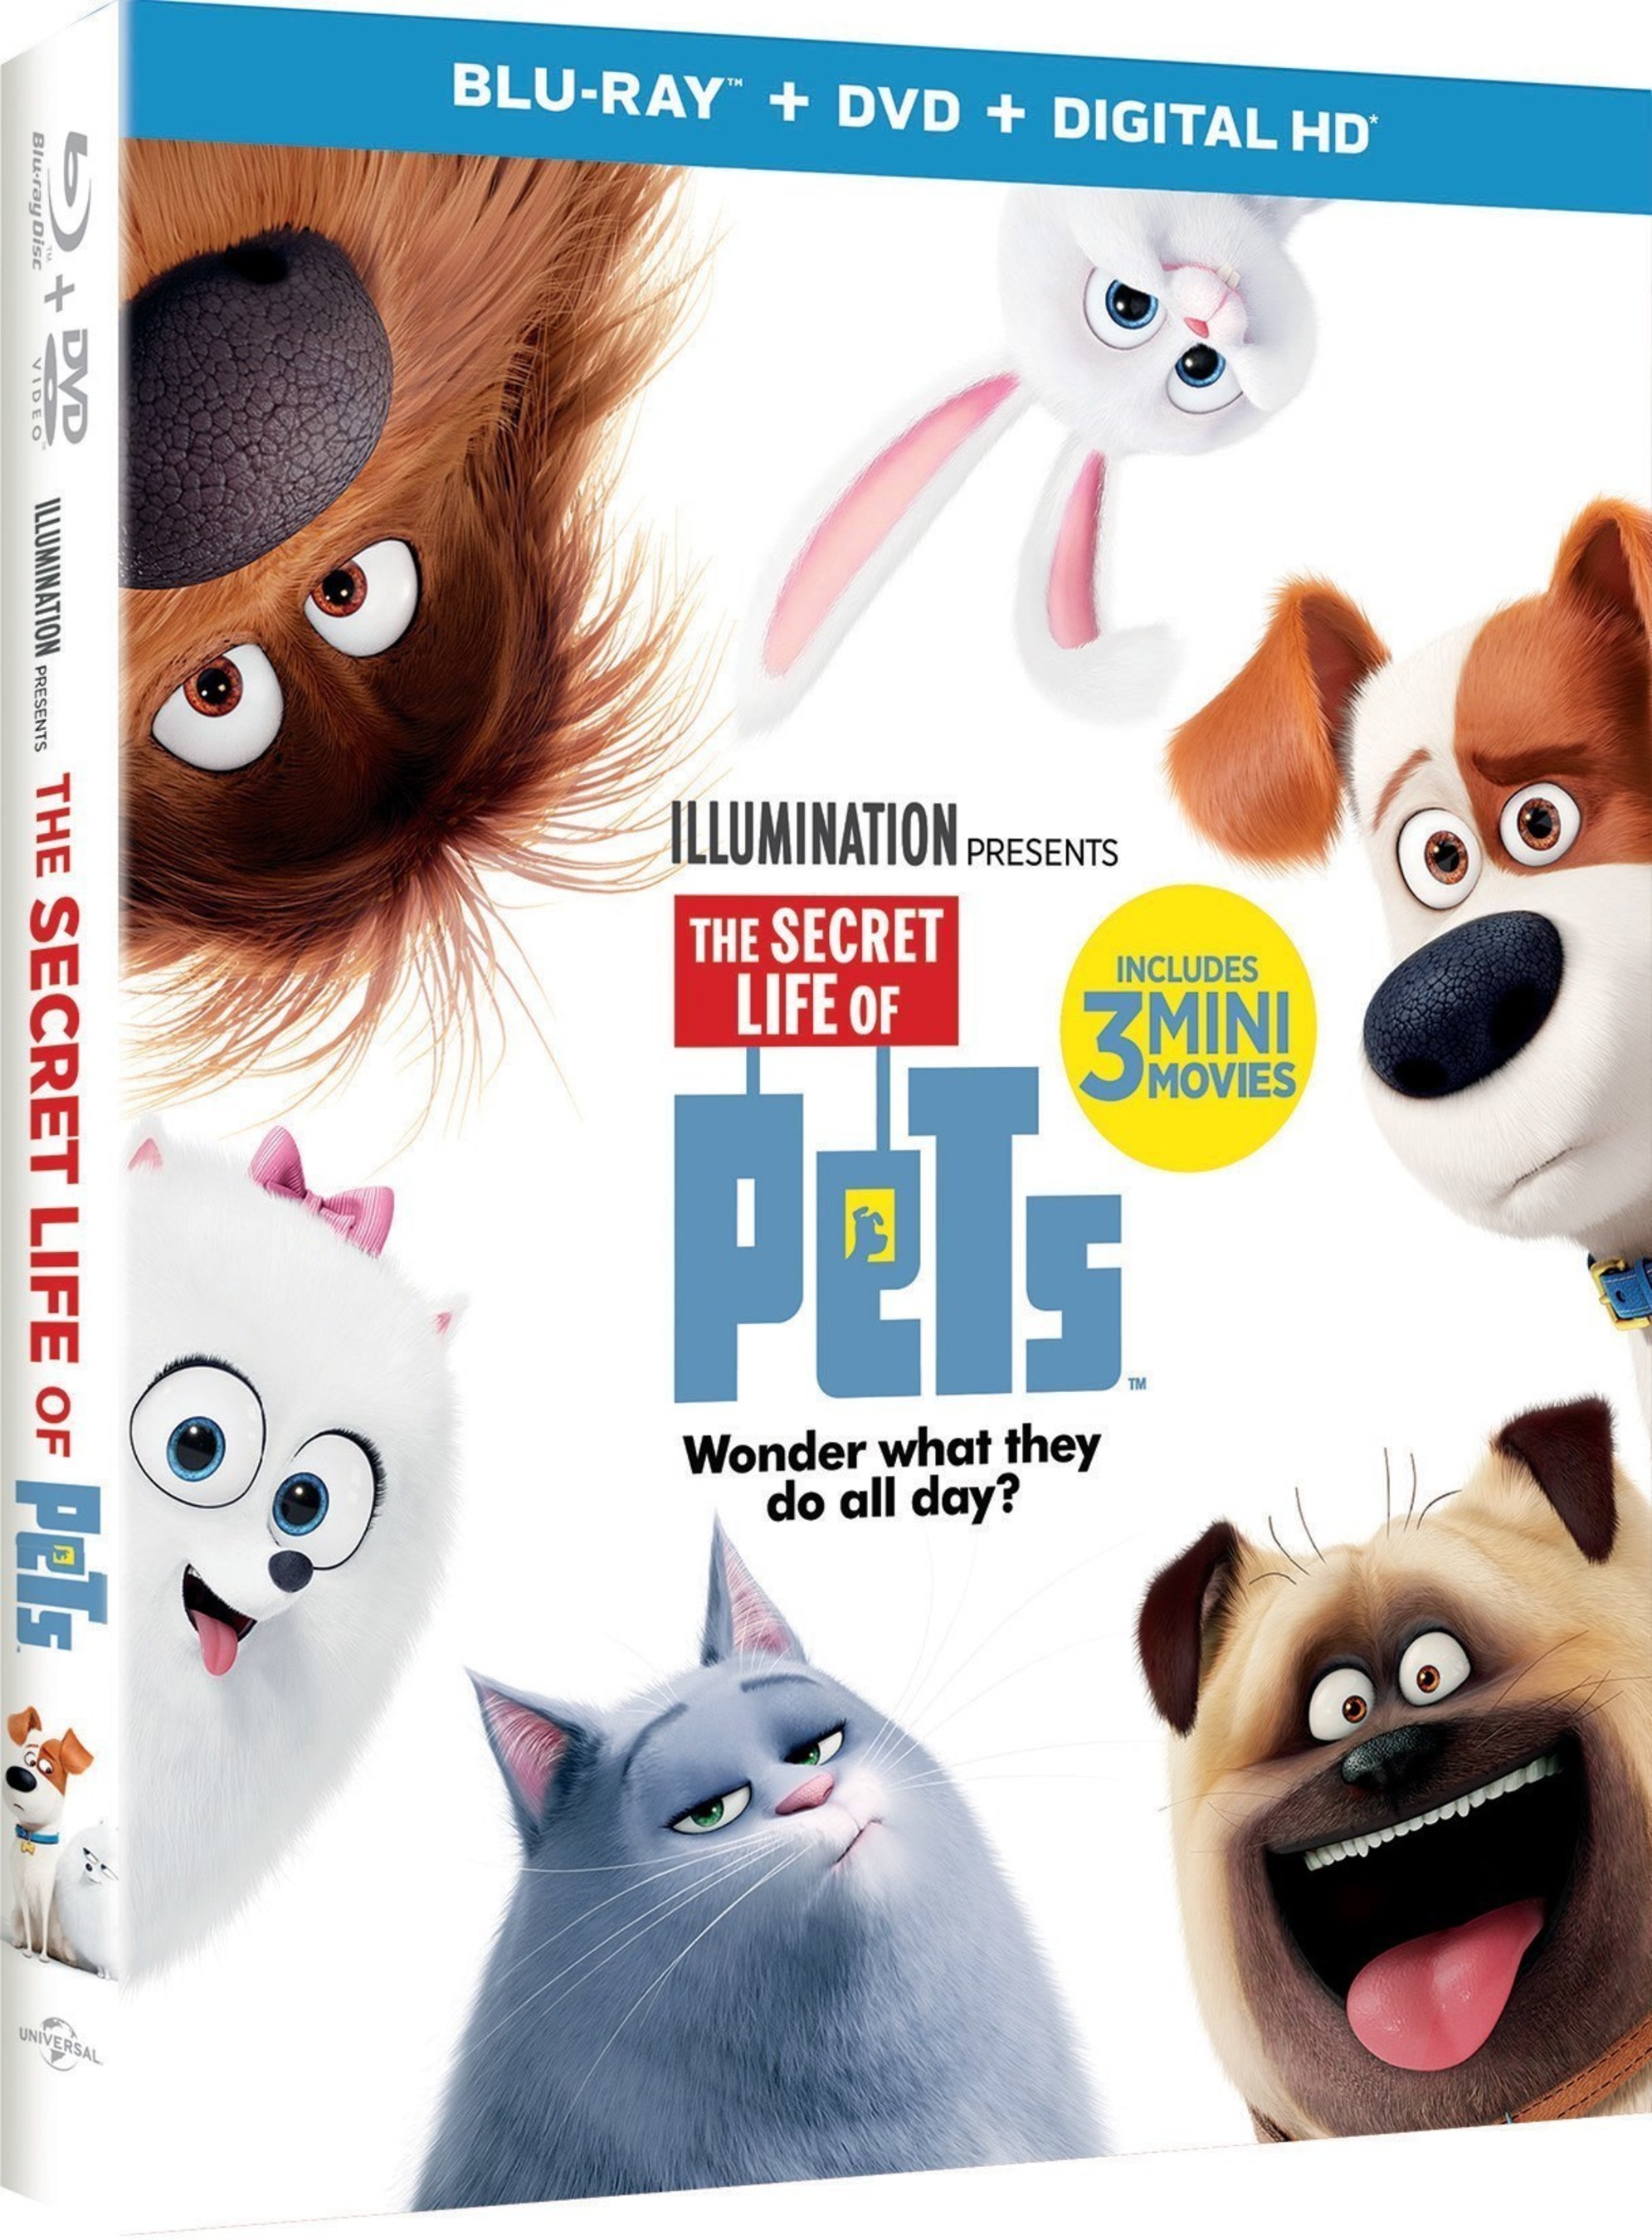 From Illumination Entertainment and Universal Pictures: The Secret Life of  Pets